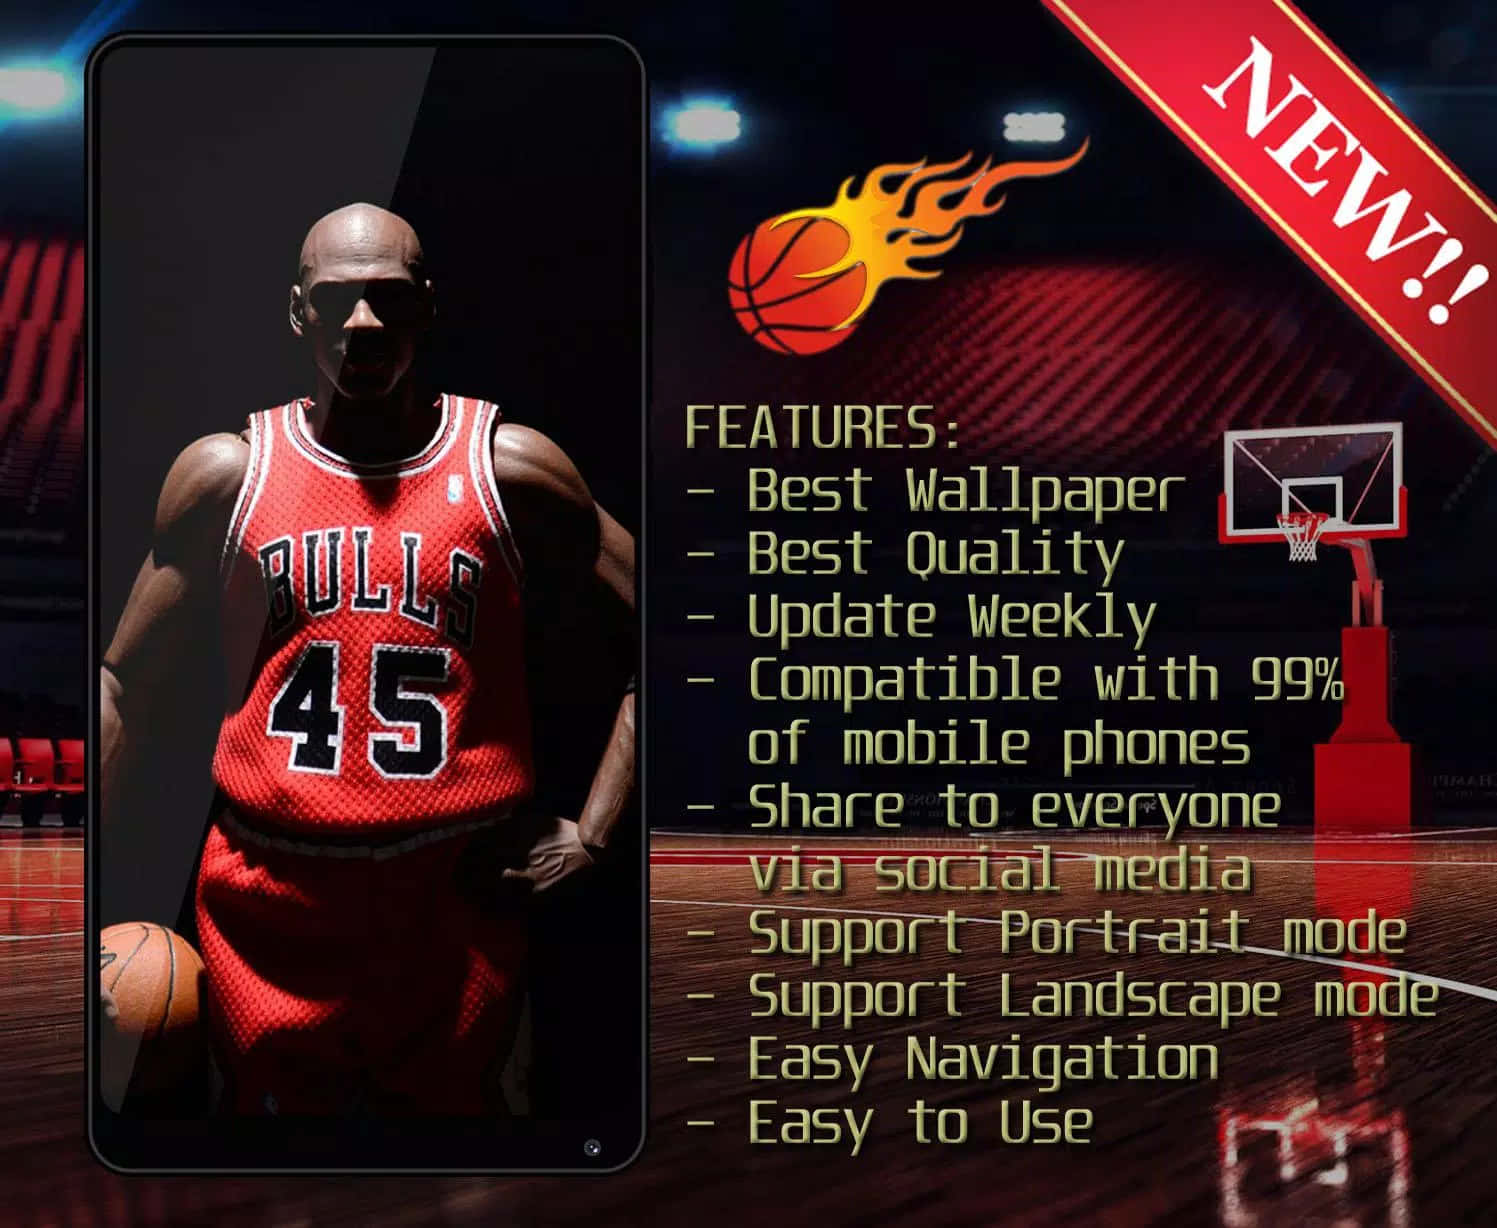 "Supercharge Your Style with Red Jordan" Wallpaper